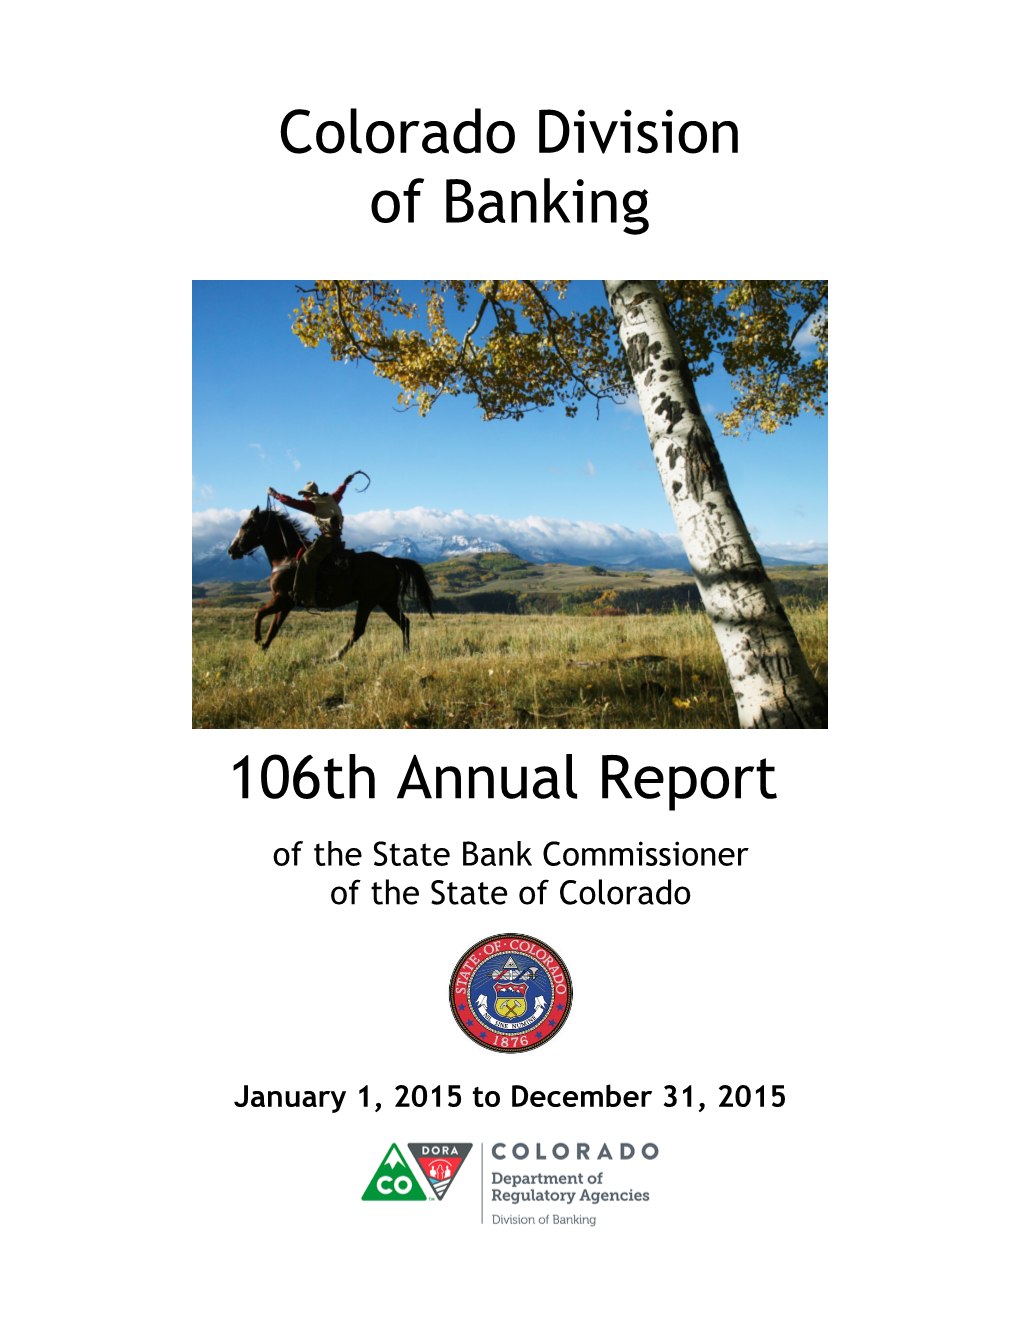 Colorado Division of Banking 106Th Annual Report